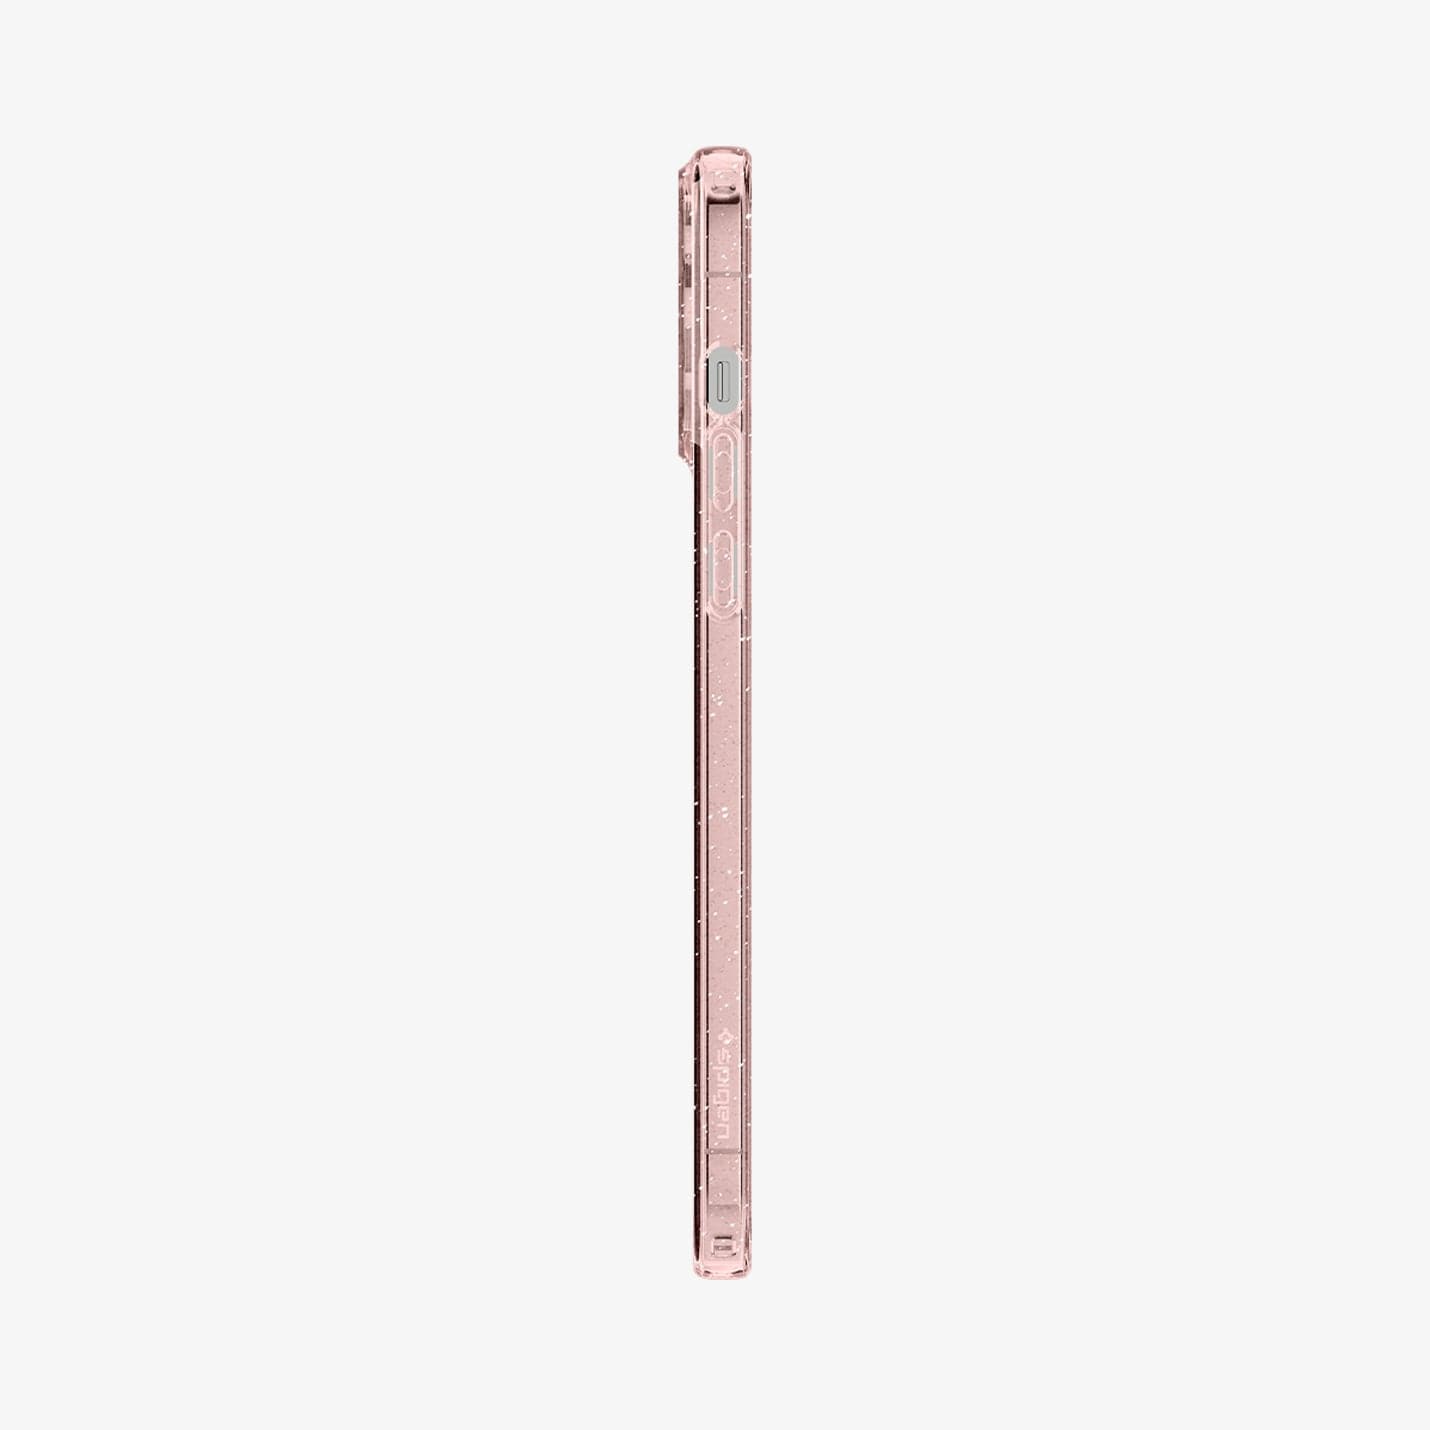 ACS03199 - iPhone 13 Pro Max Case Liquid Crystal Glitter in rose quartz showing the side with volume controls